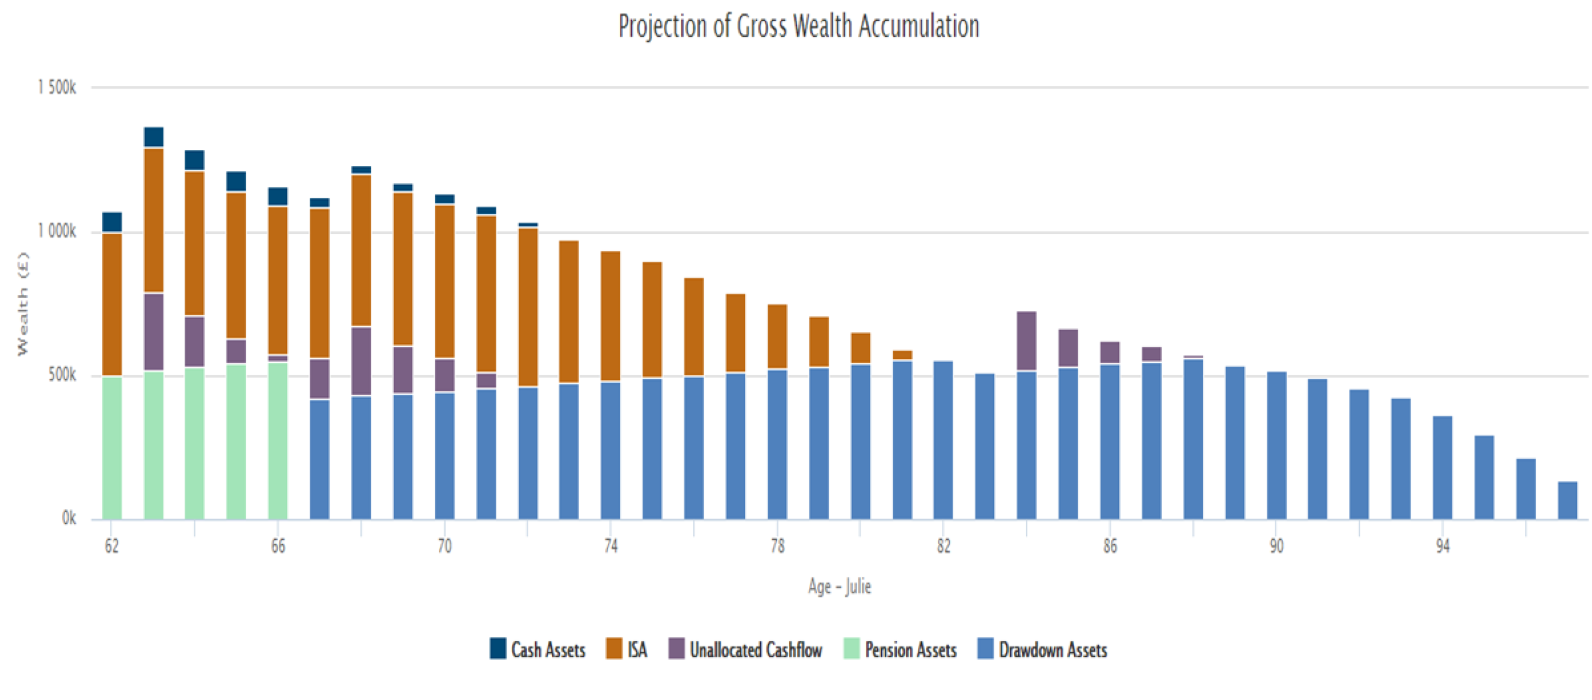 Projection of gross wealth accumulation